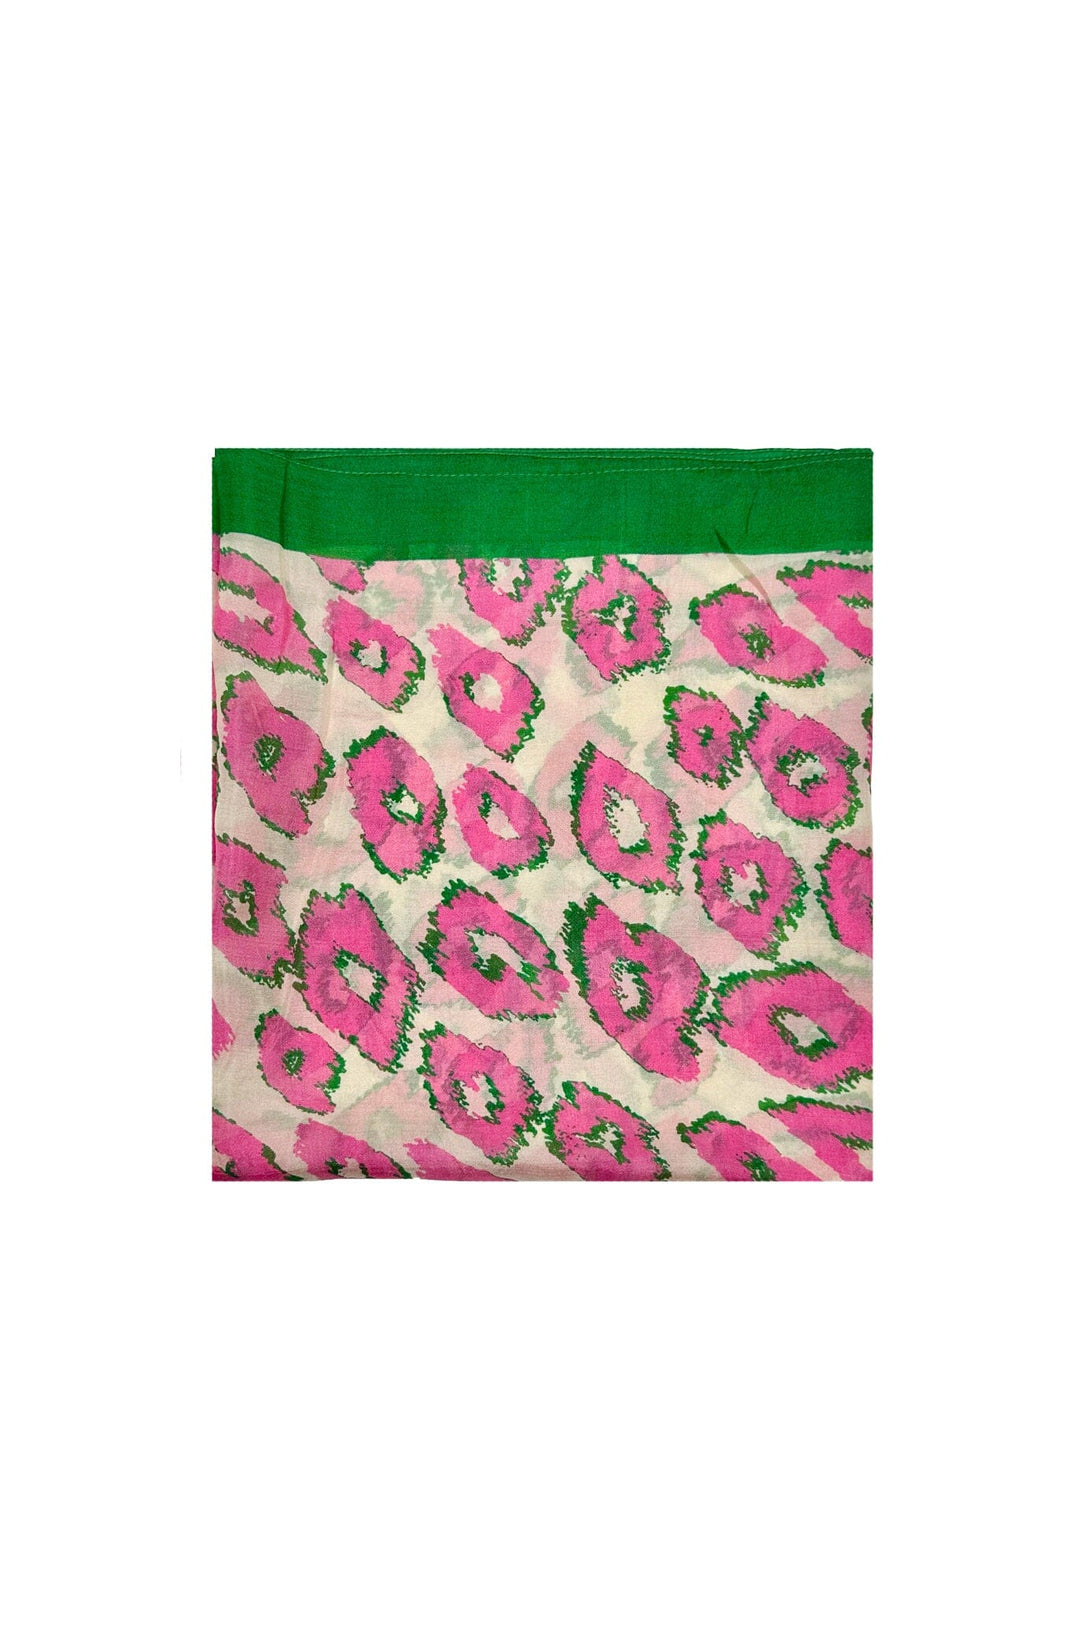 Lionnia Pink and Emerald Silk Scarf Scarves